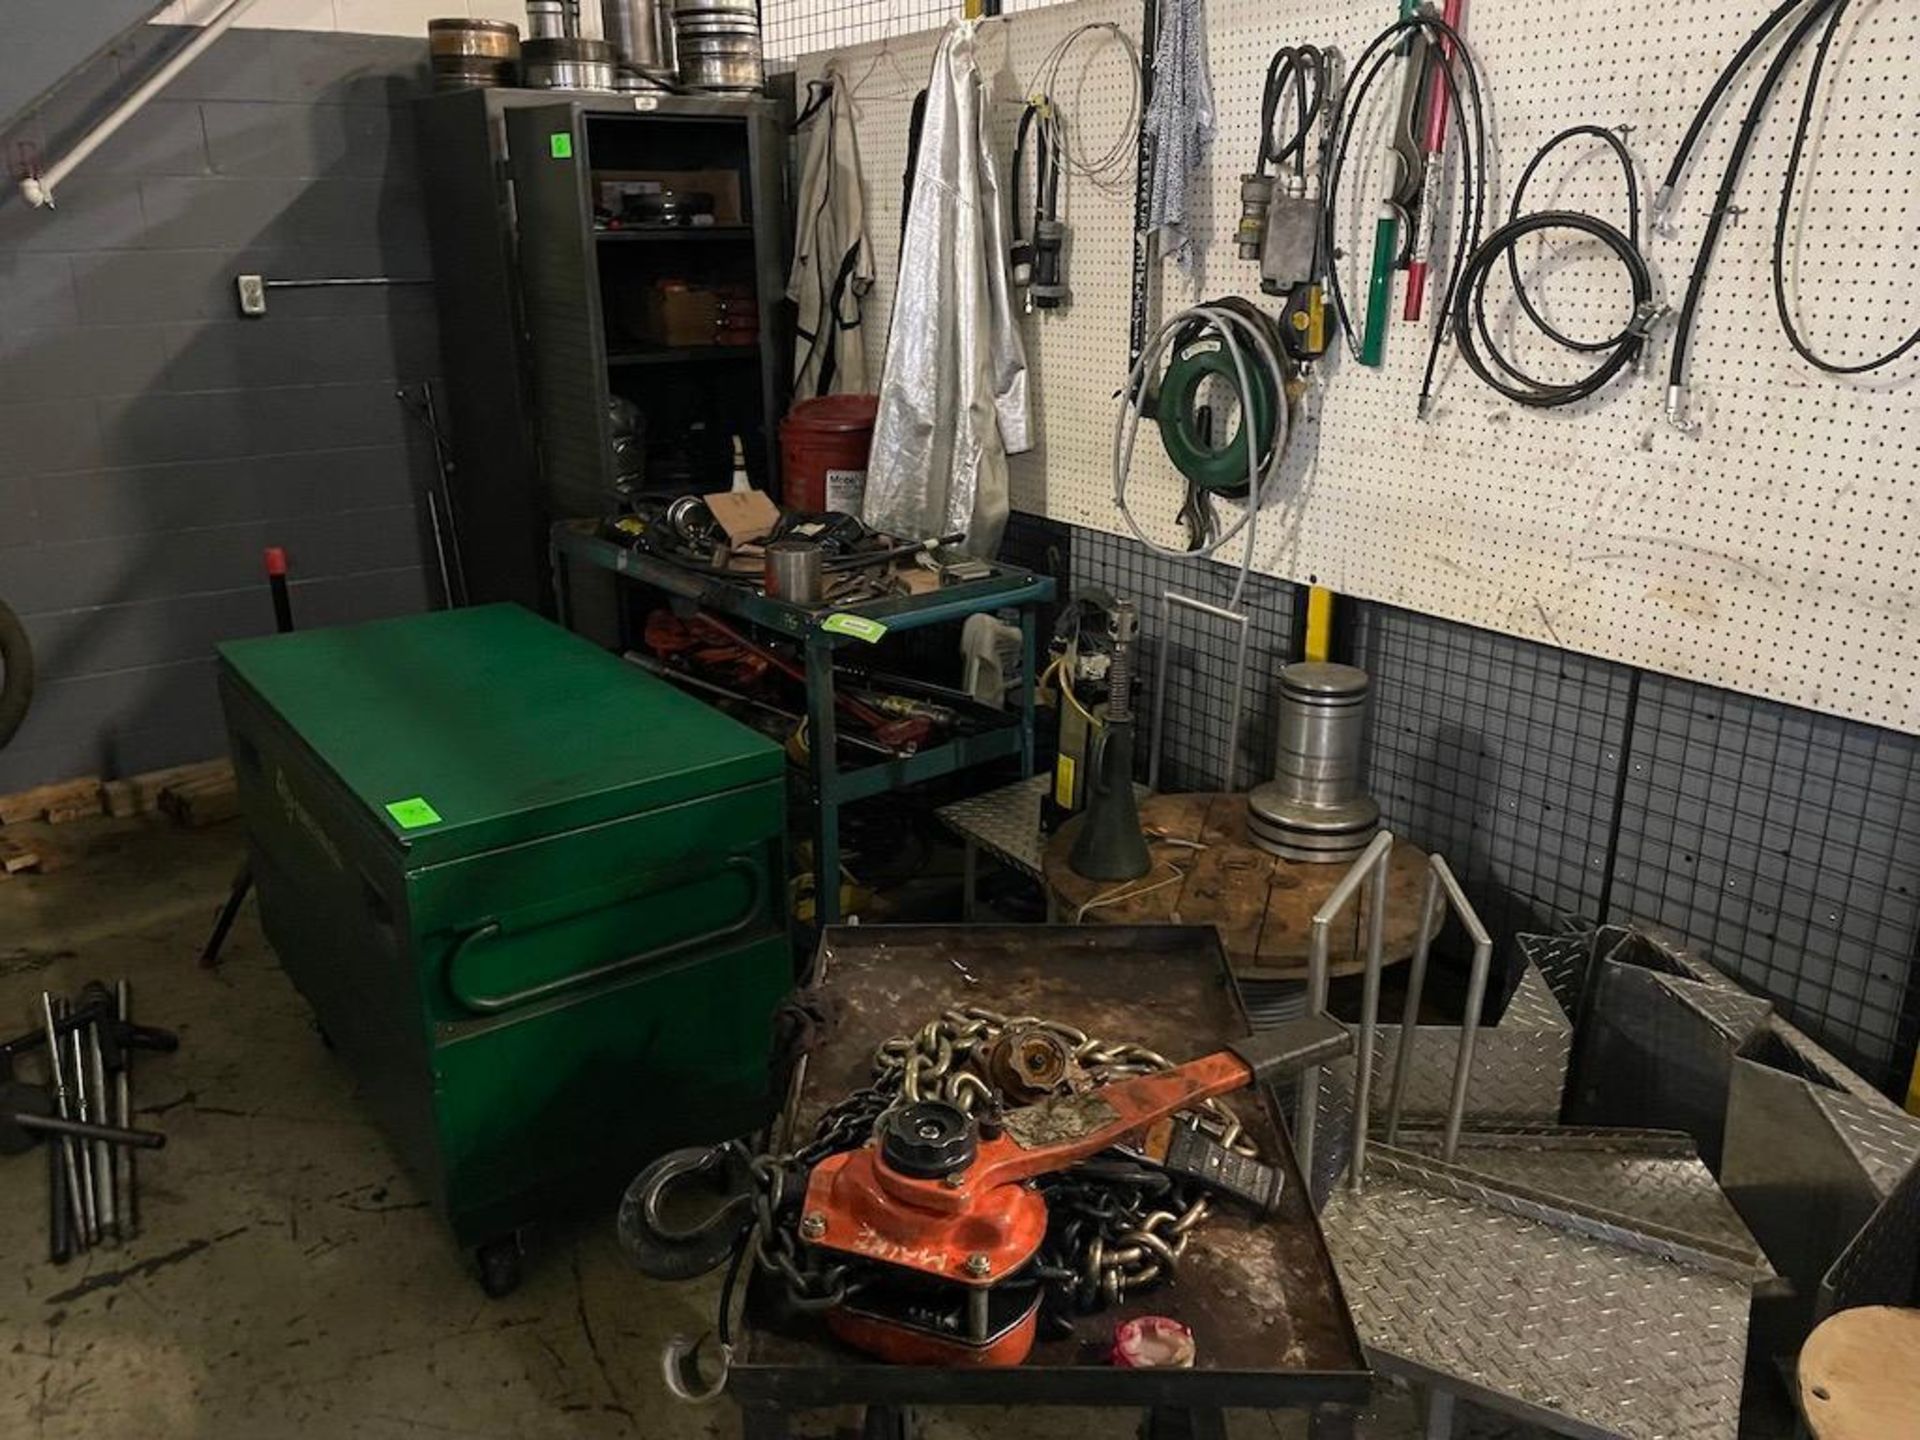 LOT REMAINING CONTENTS OF MAINTENANCE CAGE, MAG DRILL, 2 PORTABLE CARTS W JACKS, TOOLS, CONTENTS,